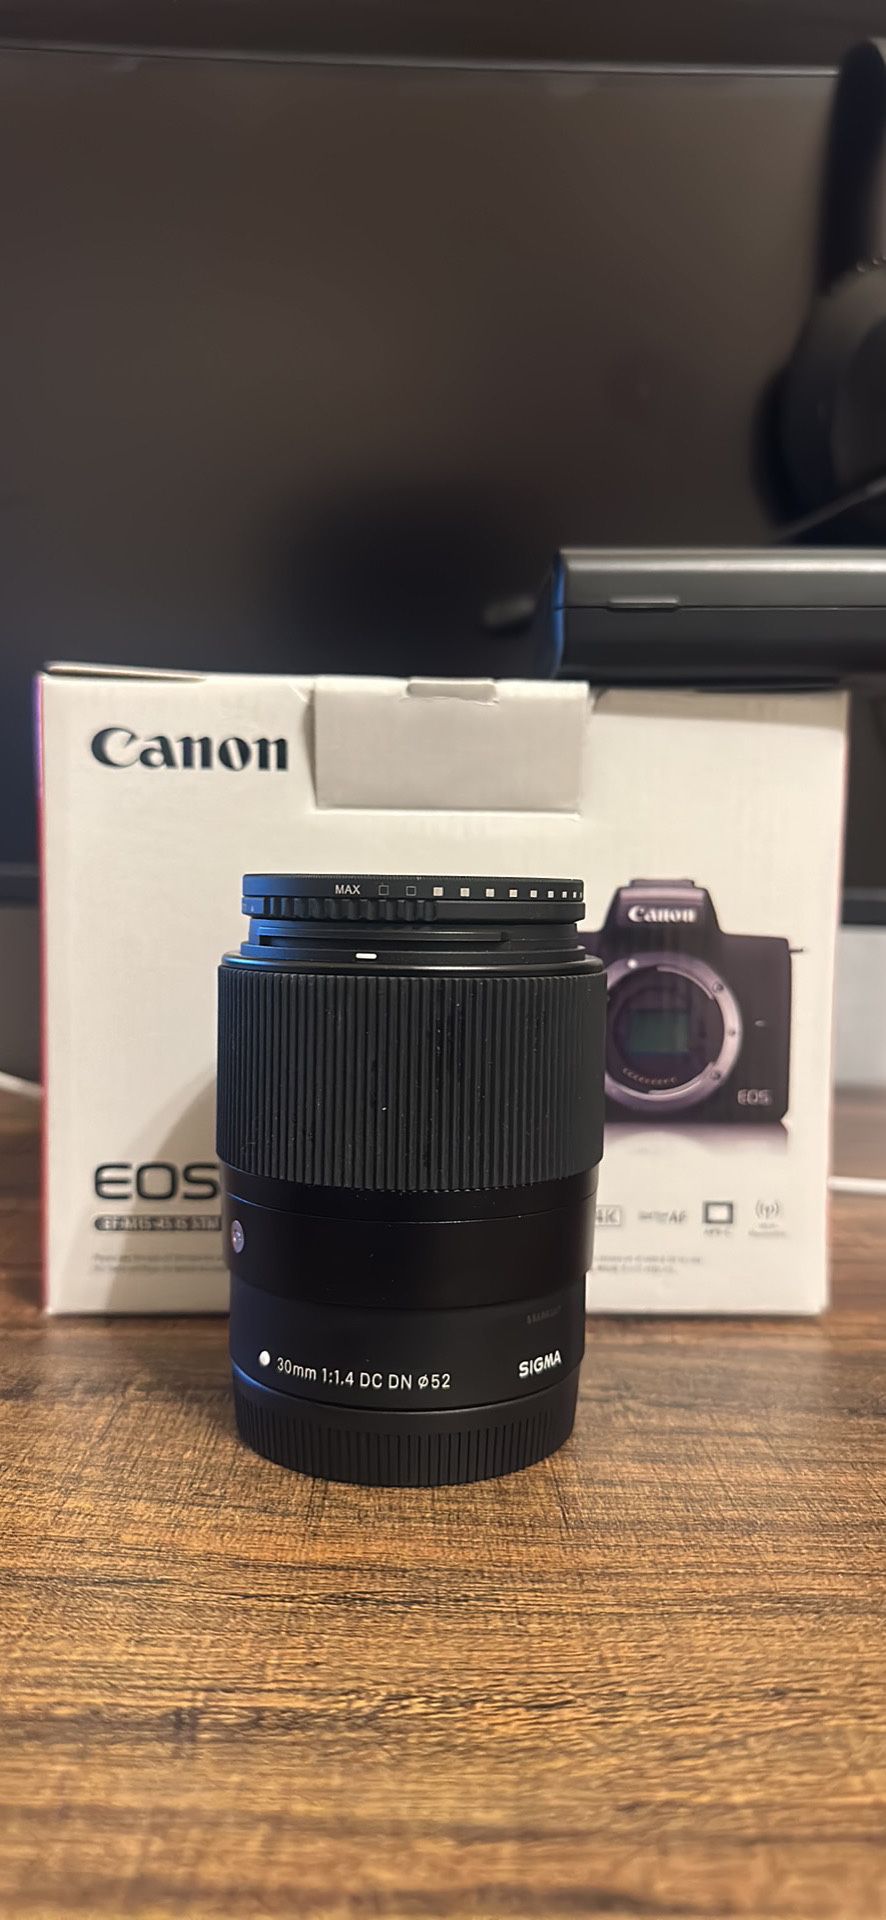 30mm Sigma Lens With a Nd Filter